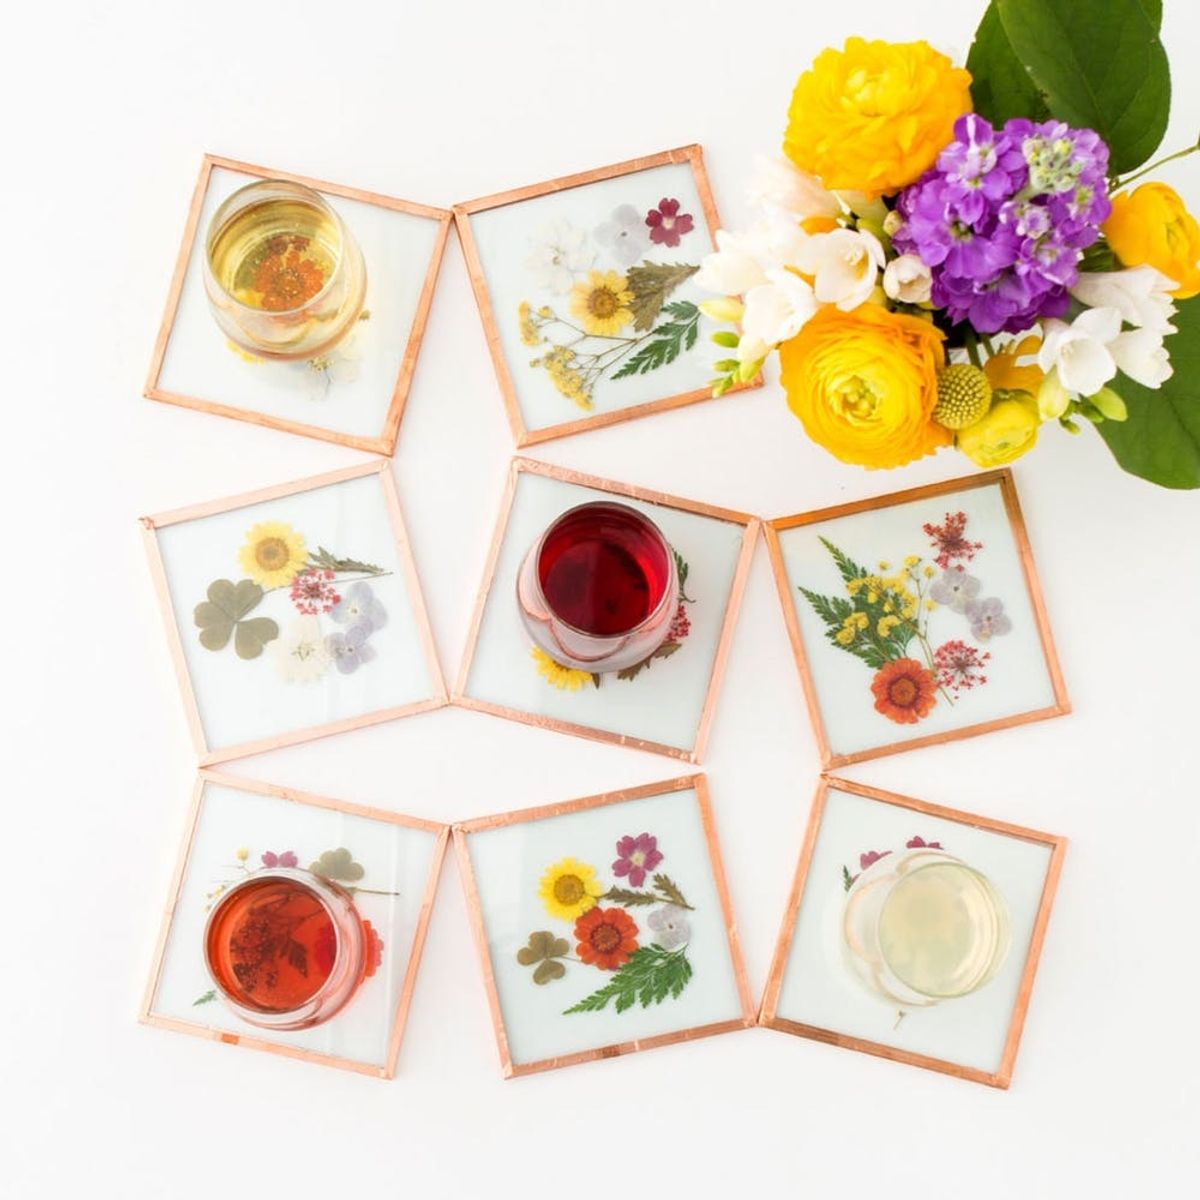 DIY These Pretty Coasters Instead of Buying Flowers for Mom